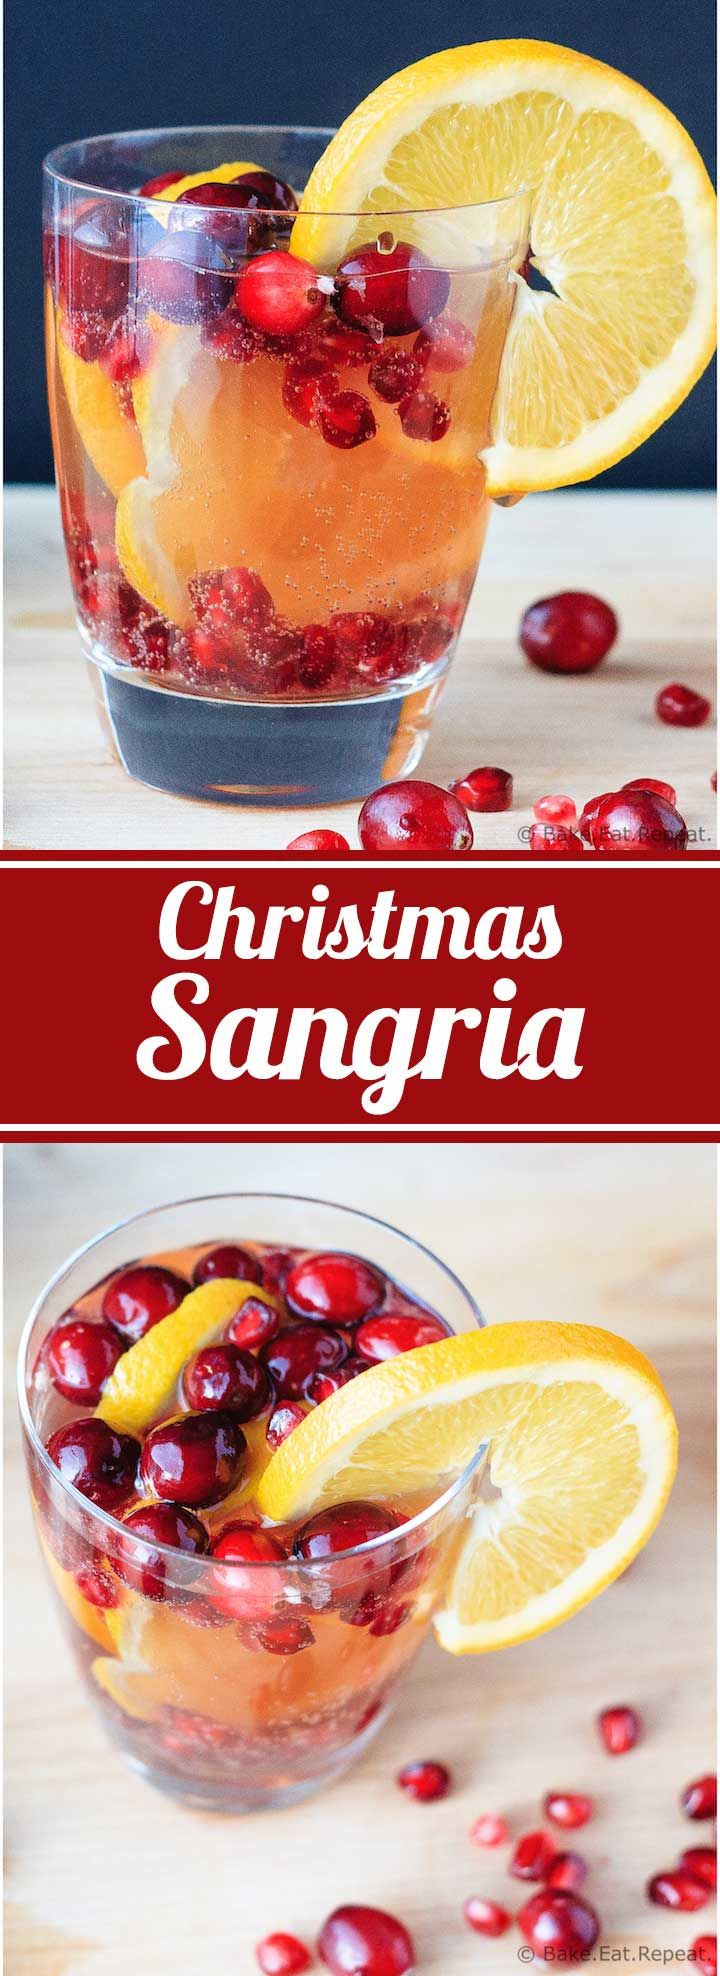 Christmas Drink Recipes
 17 Best ideas about Christmas Buffet on Pinterest